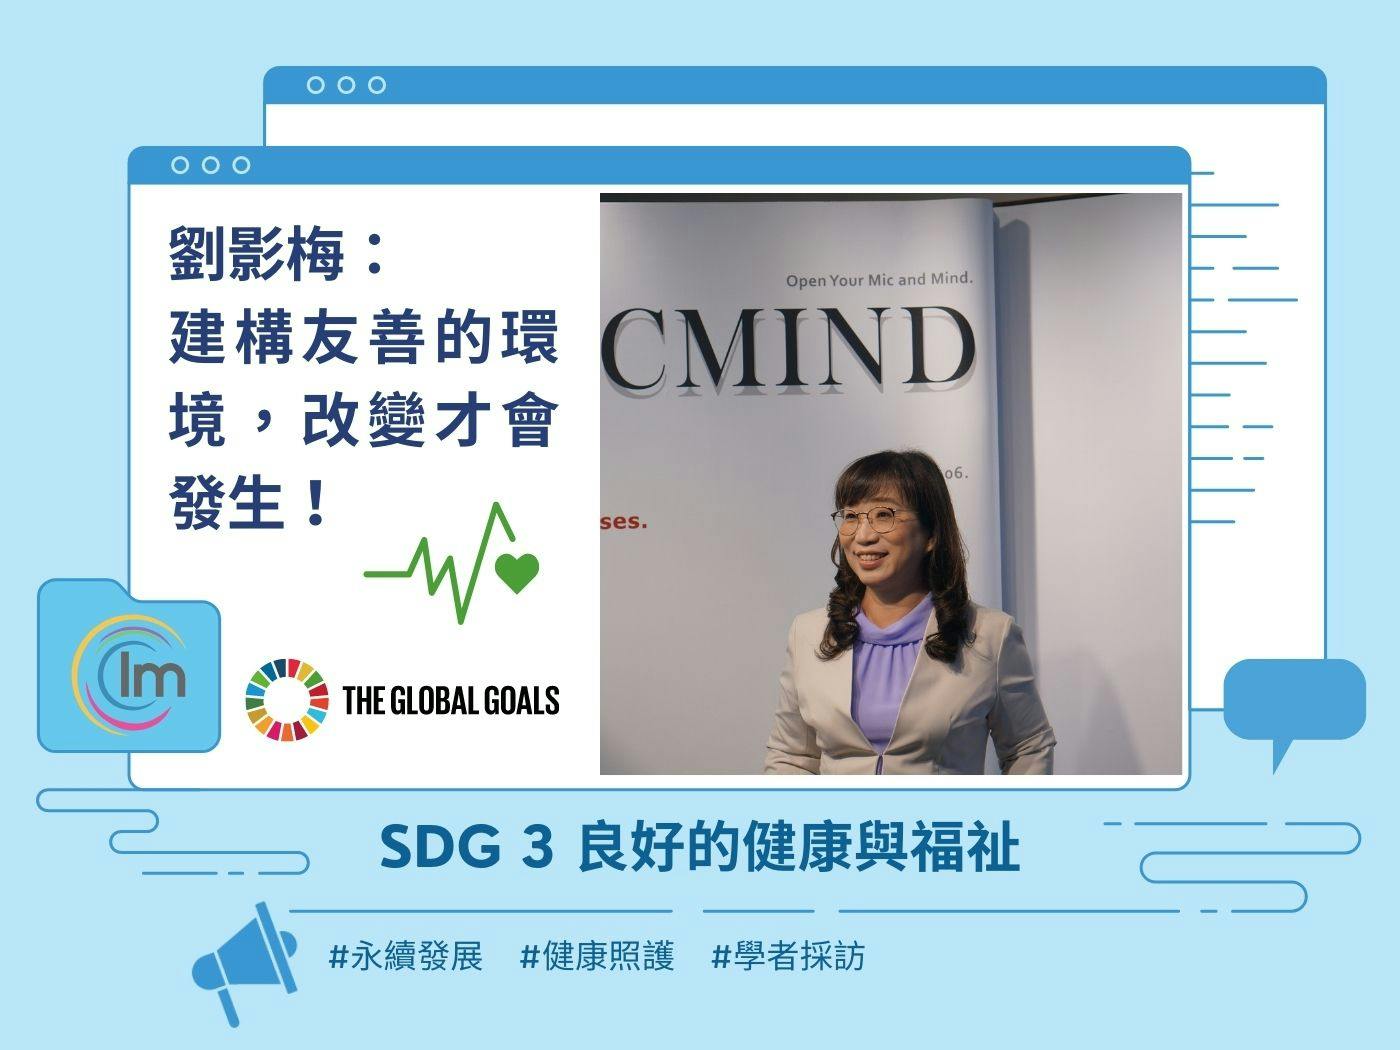 Impactio - SDGs 3 Good Health and Well-being - 建構友善的環境，改變才會發生！